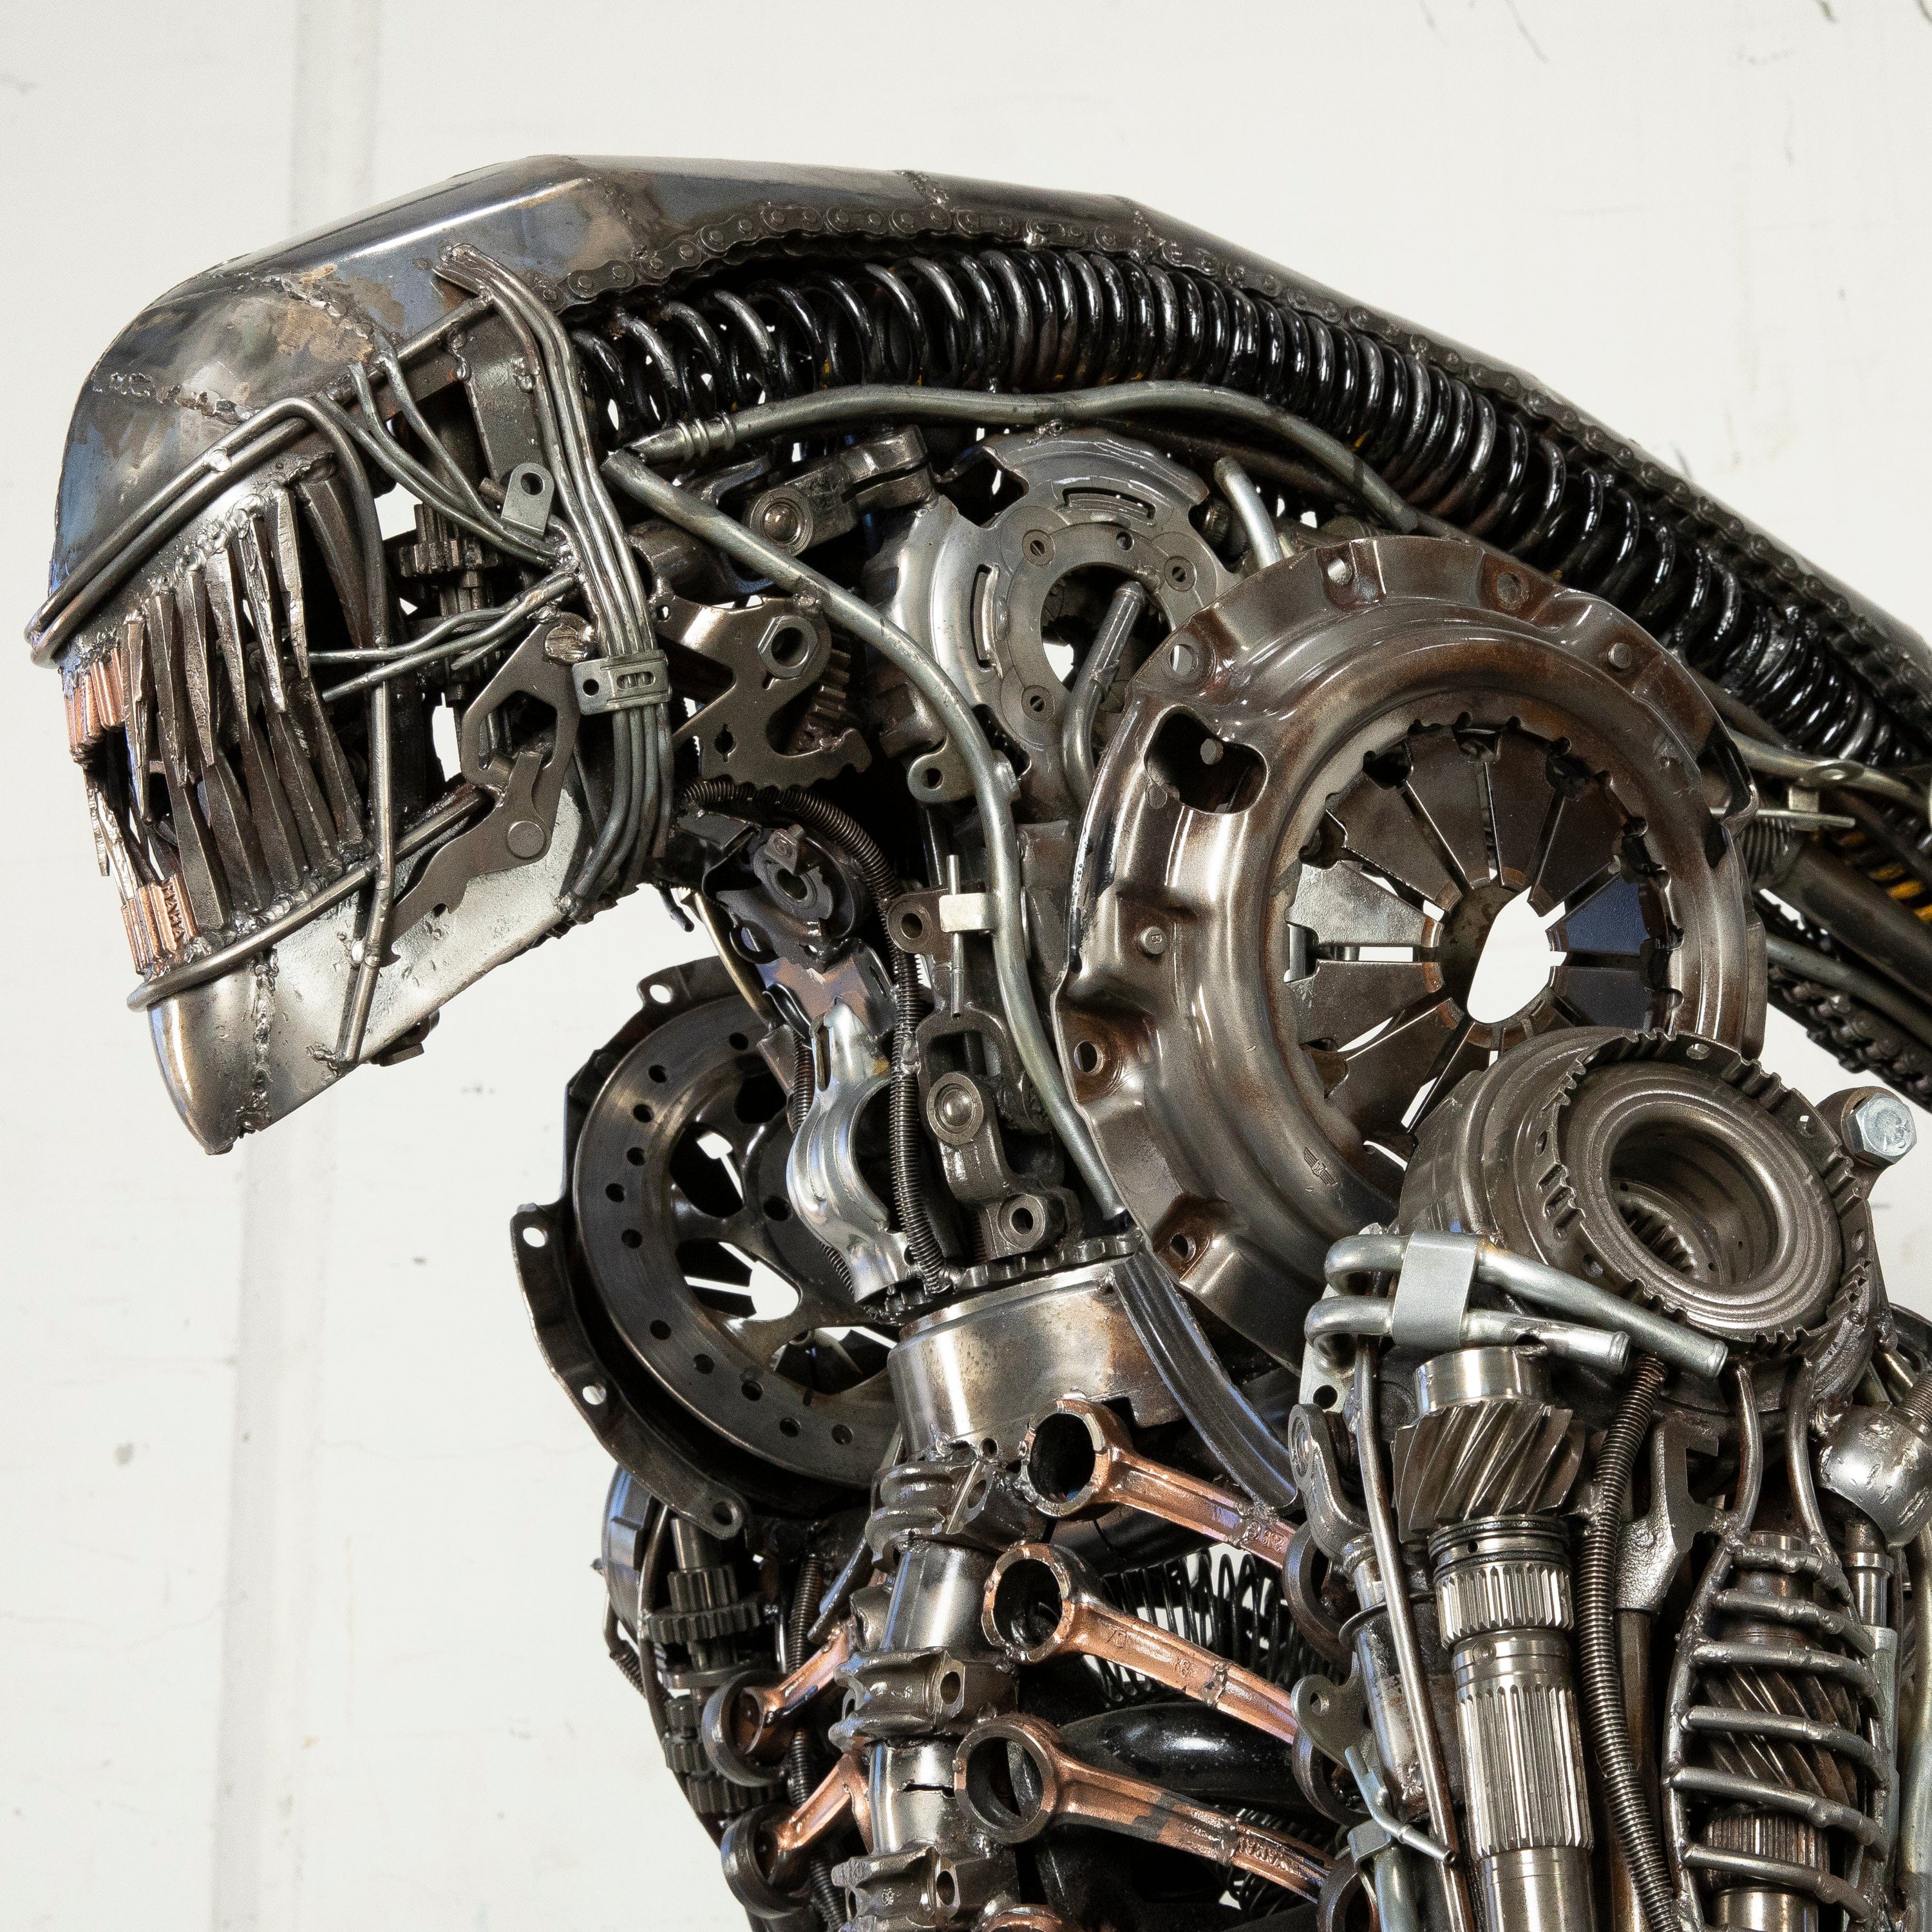 Kalifano Recycled Metal Art 91" Alien Inspired Recycled Metal Art Sculpture RMS-A230-S08